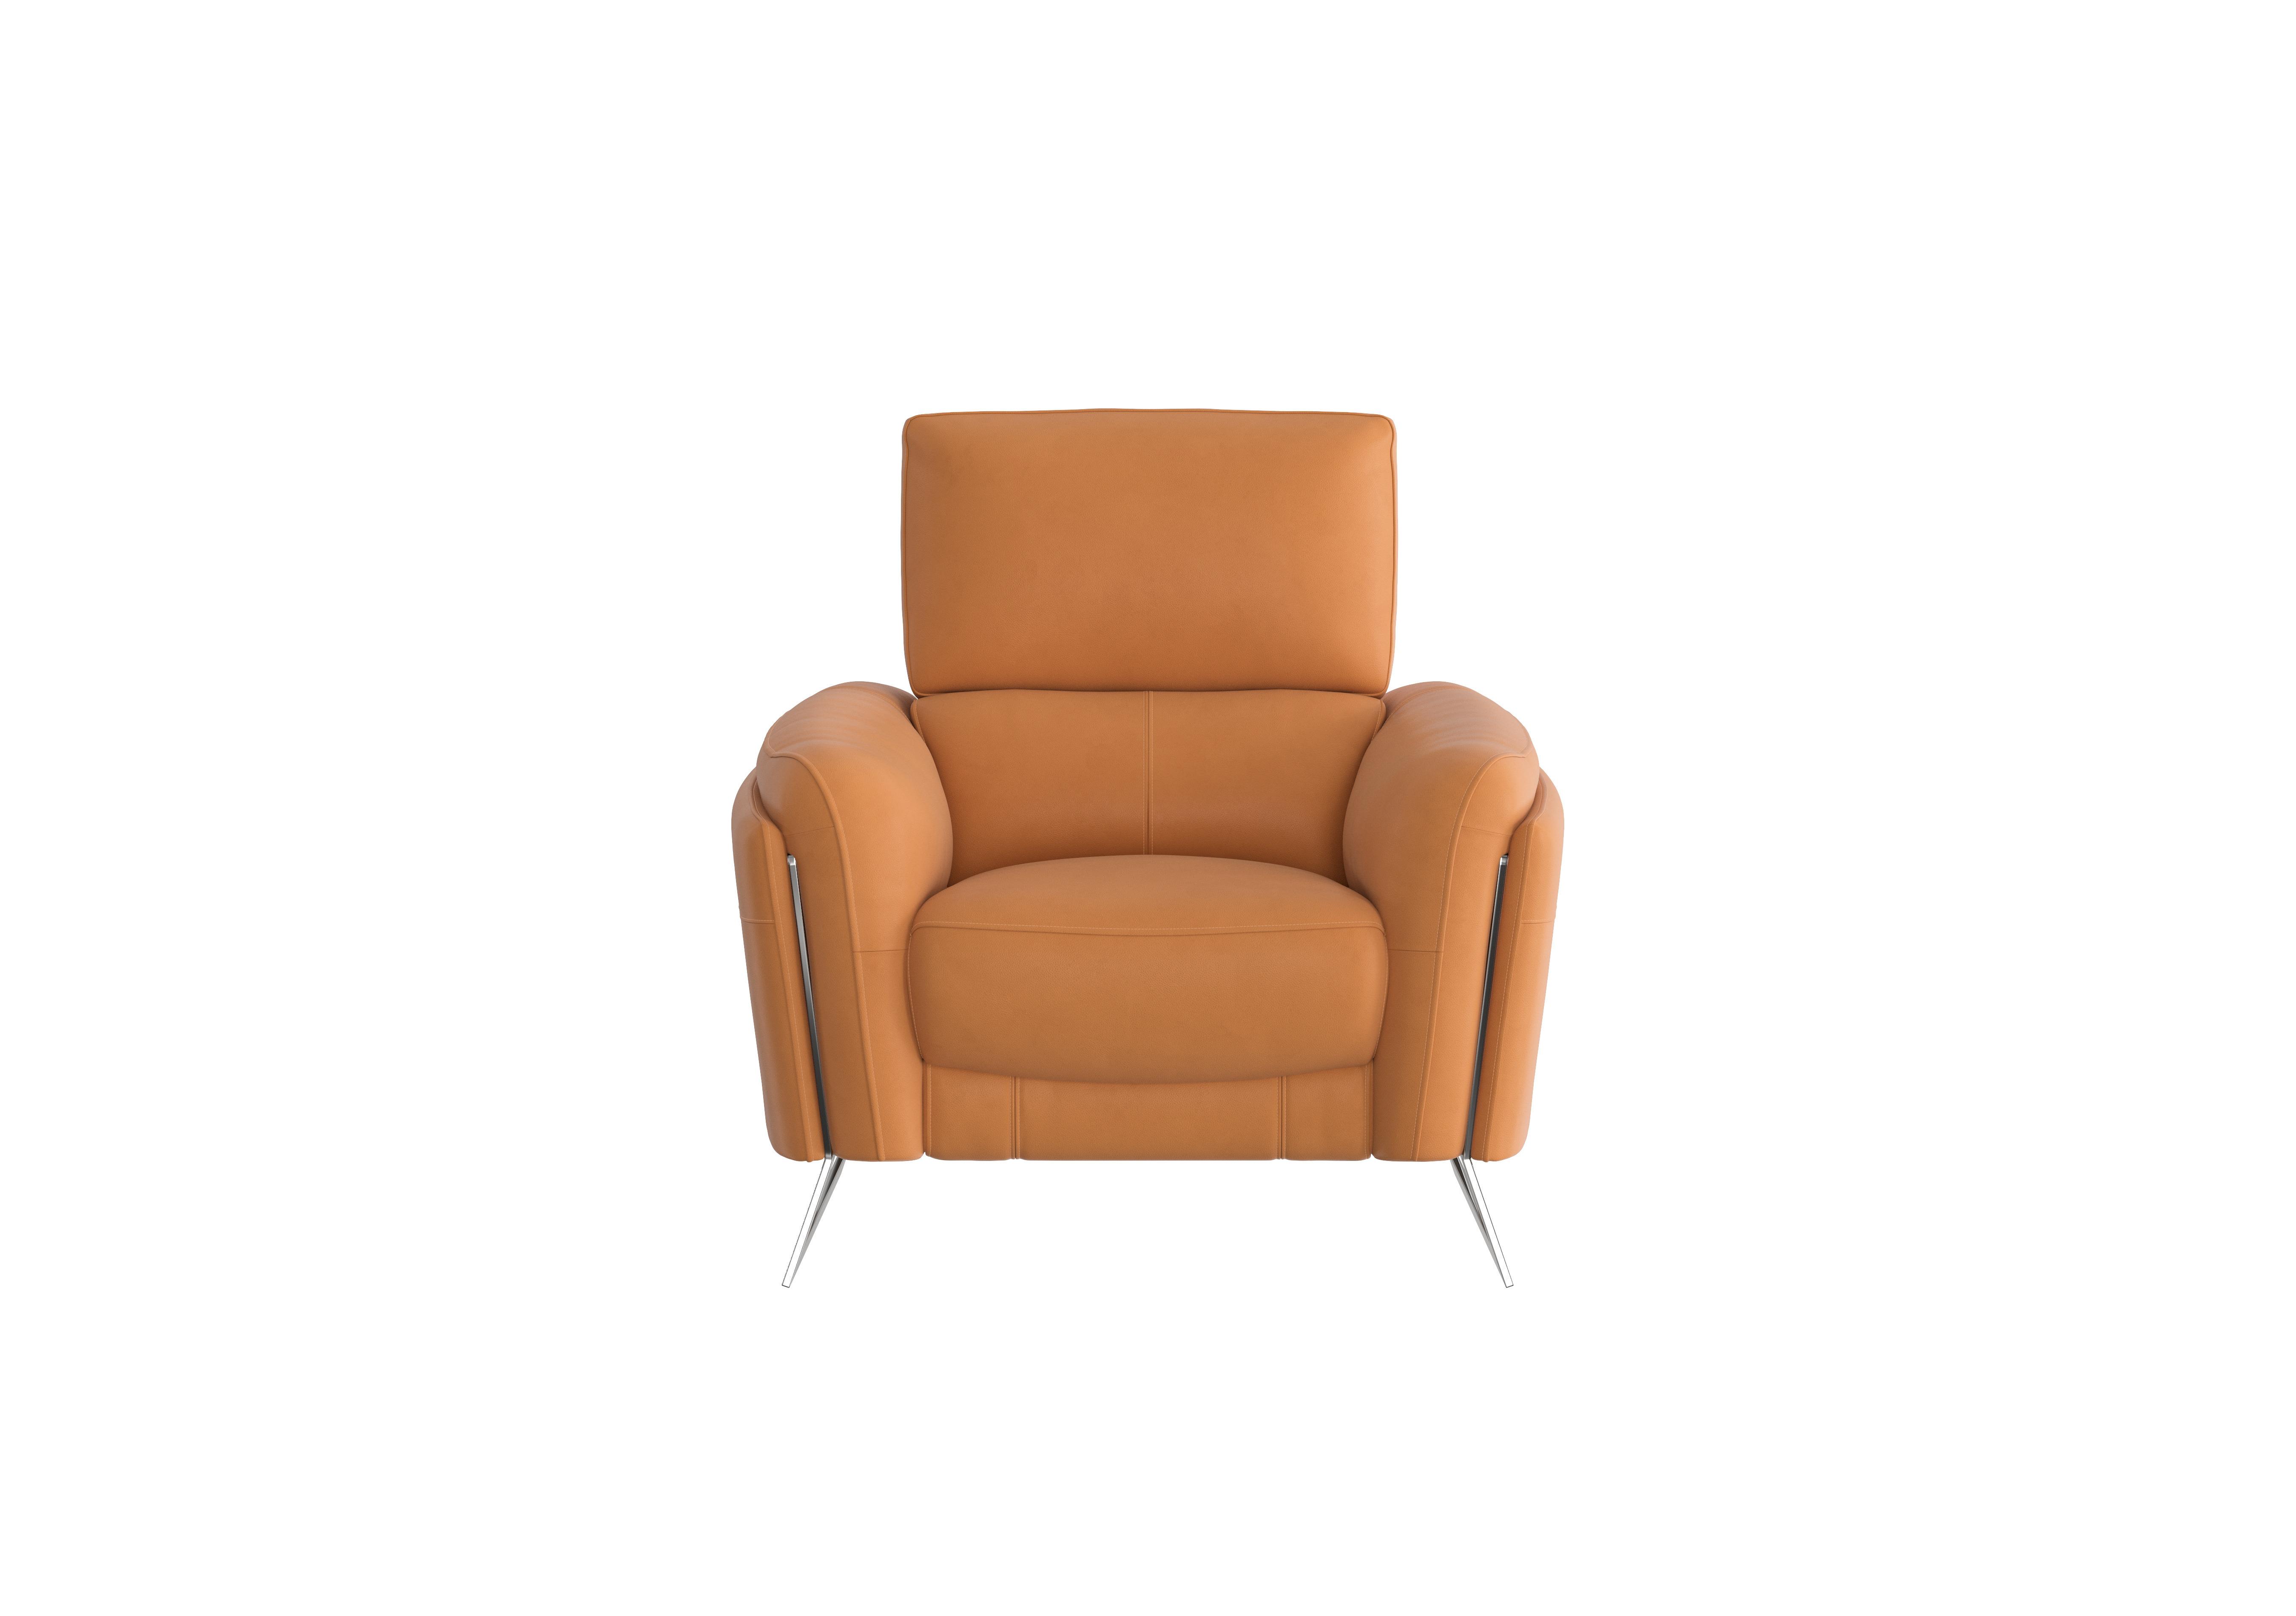 Amarilla Leather Armchair in Bv-335e Honey Yellow on Furniture Village